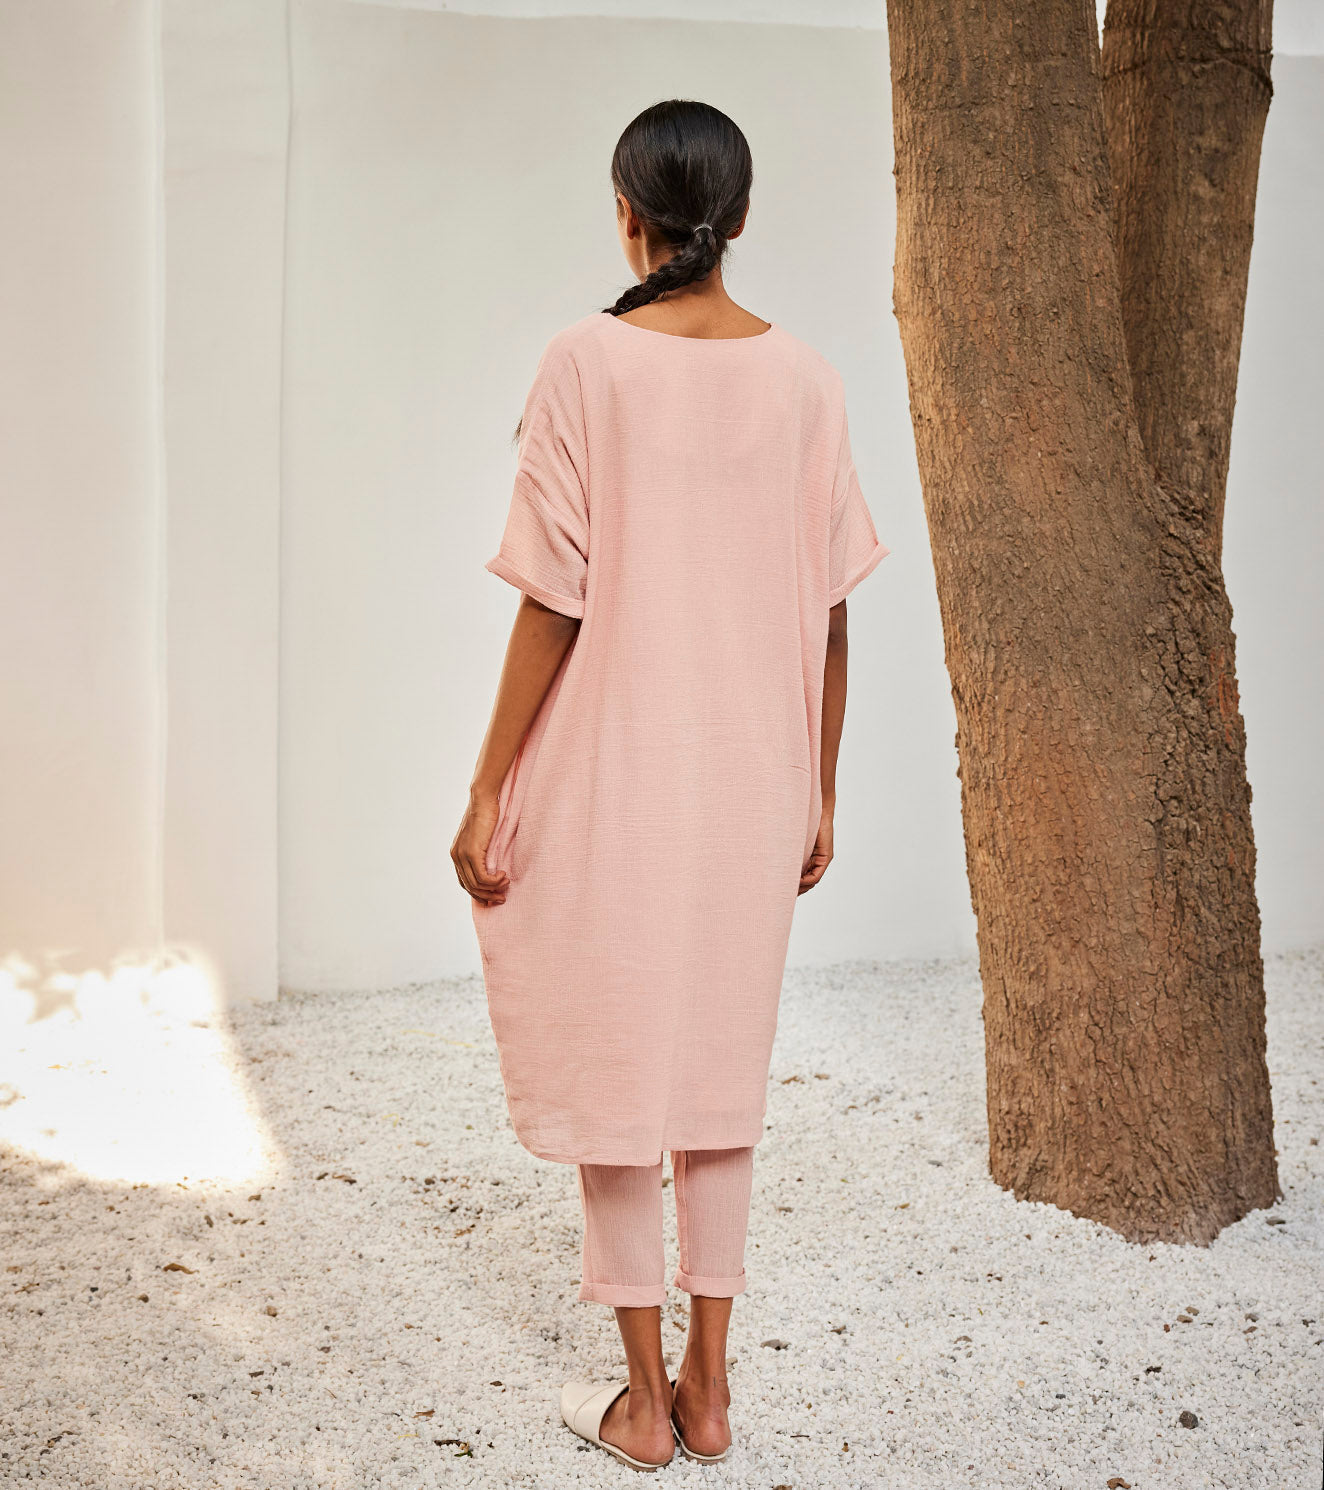 Heart Lock Co-ord Set by Khara Kapas with Casual Wear, Co-ord Sets, Gauge Cotton, Oh Susanna by Khara Kapas, Organic, Pink, Regular Fit, Solids, Travel, Travel Co-ords, Womenswear at Kamakhyaa for sustainable fashion